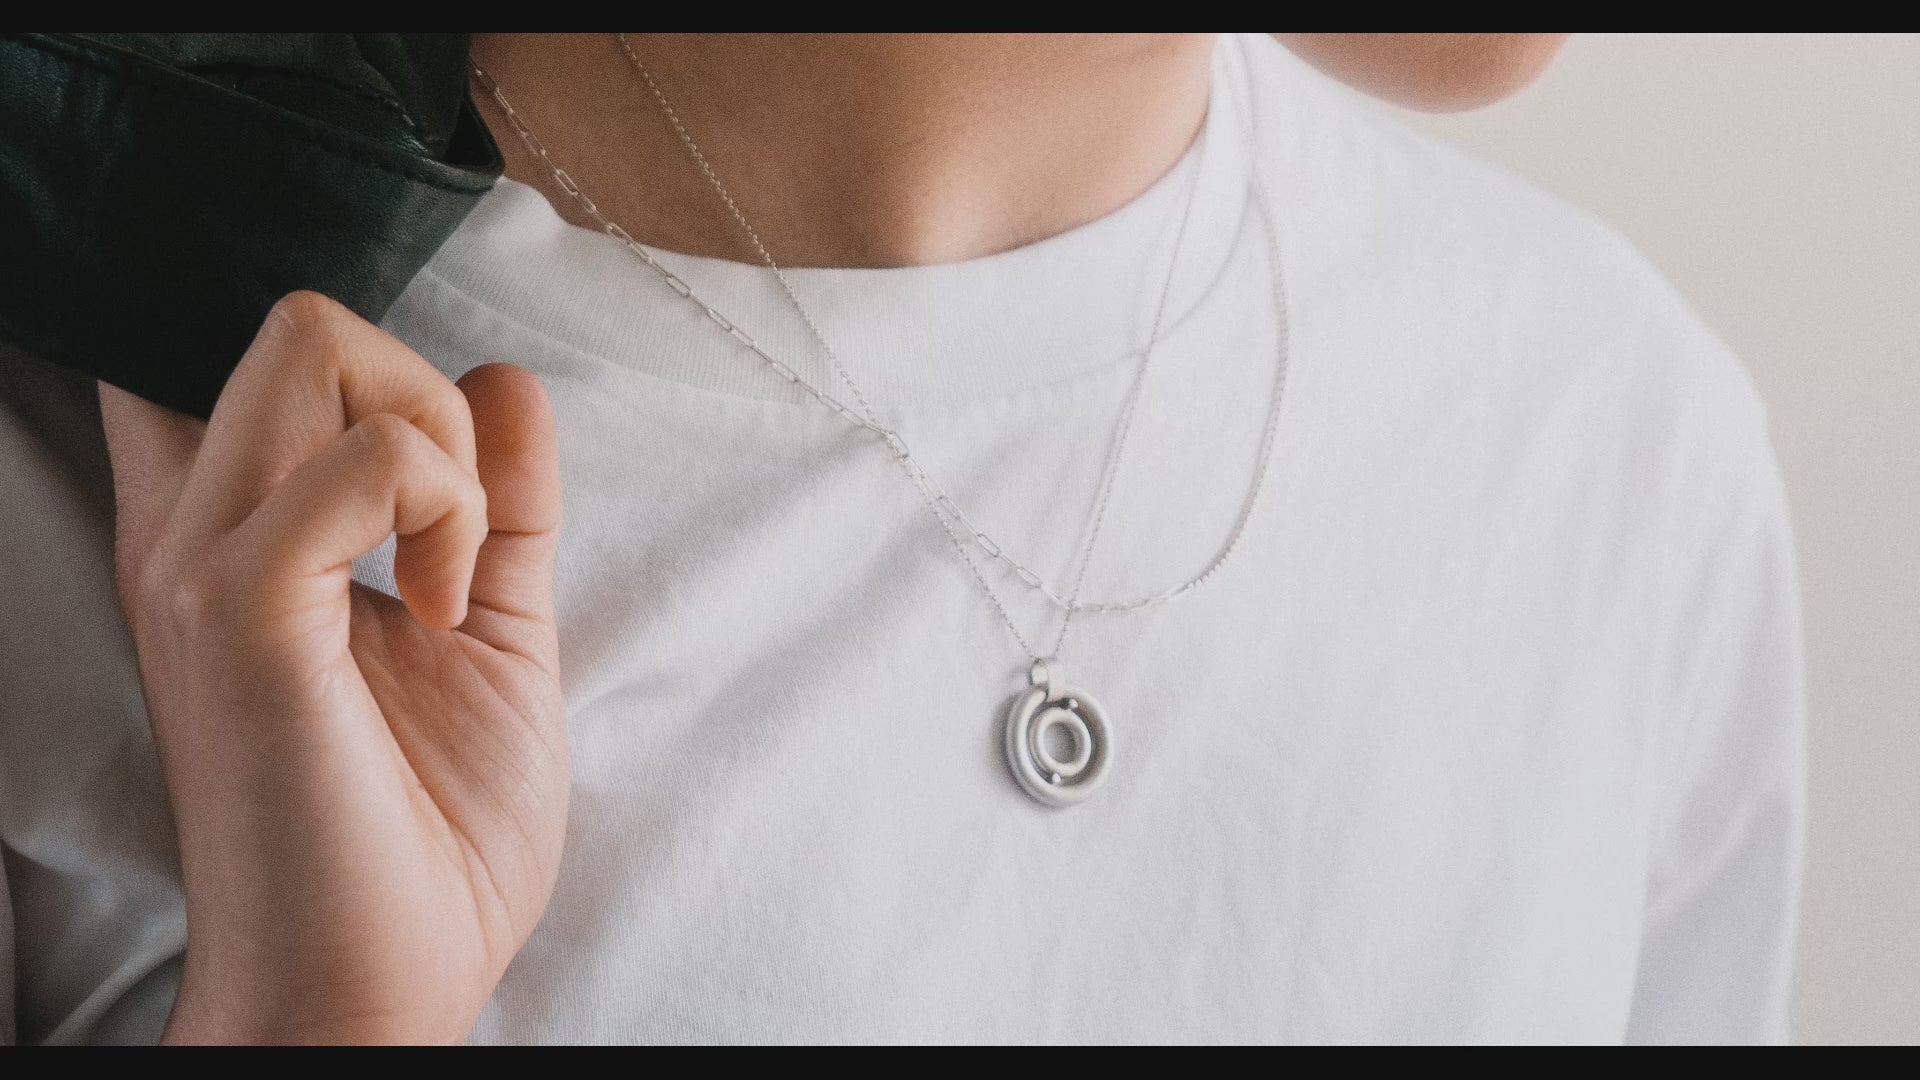 Load video: model wearing a white tshirt silver compass charm necklace staced with a silver small chain. Panning upward across their ears with silver chunky chain earrings in two lobe piercings